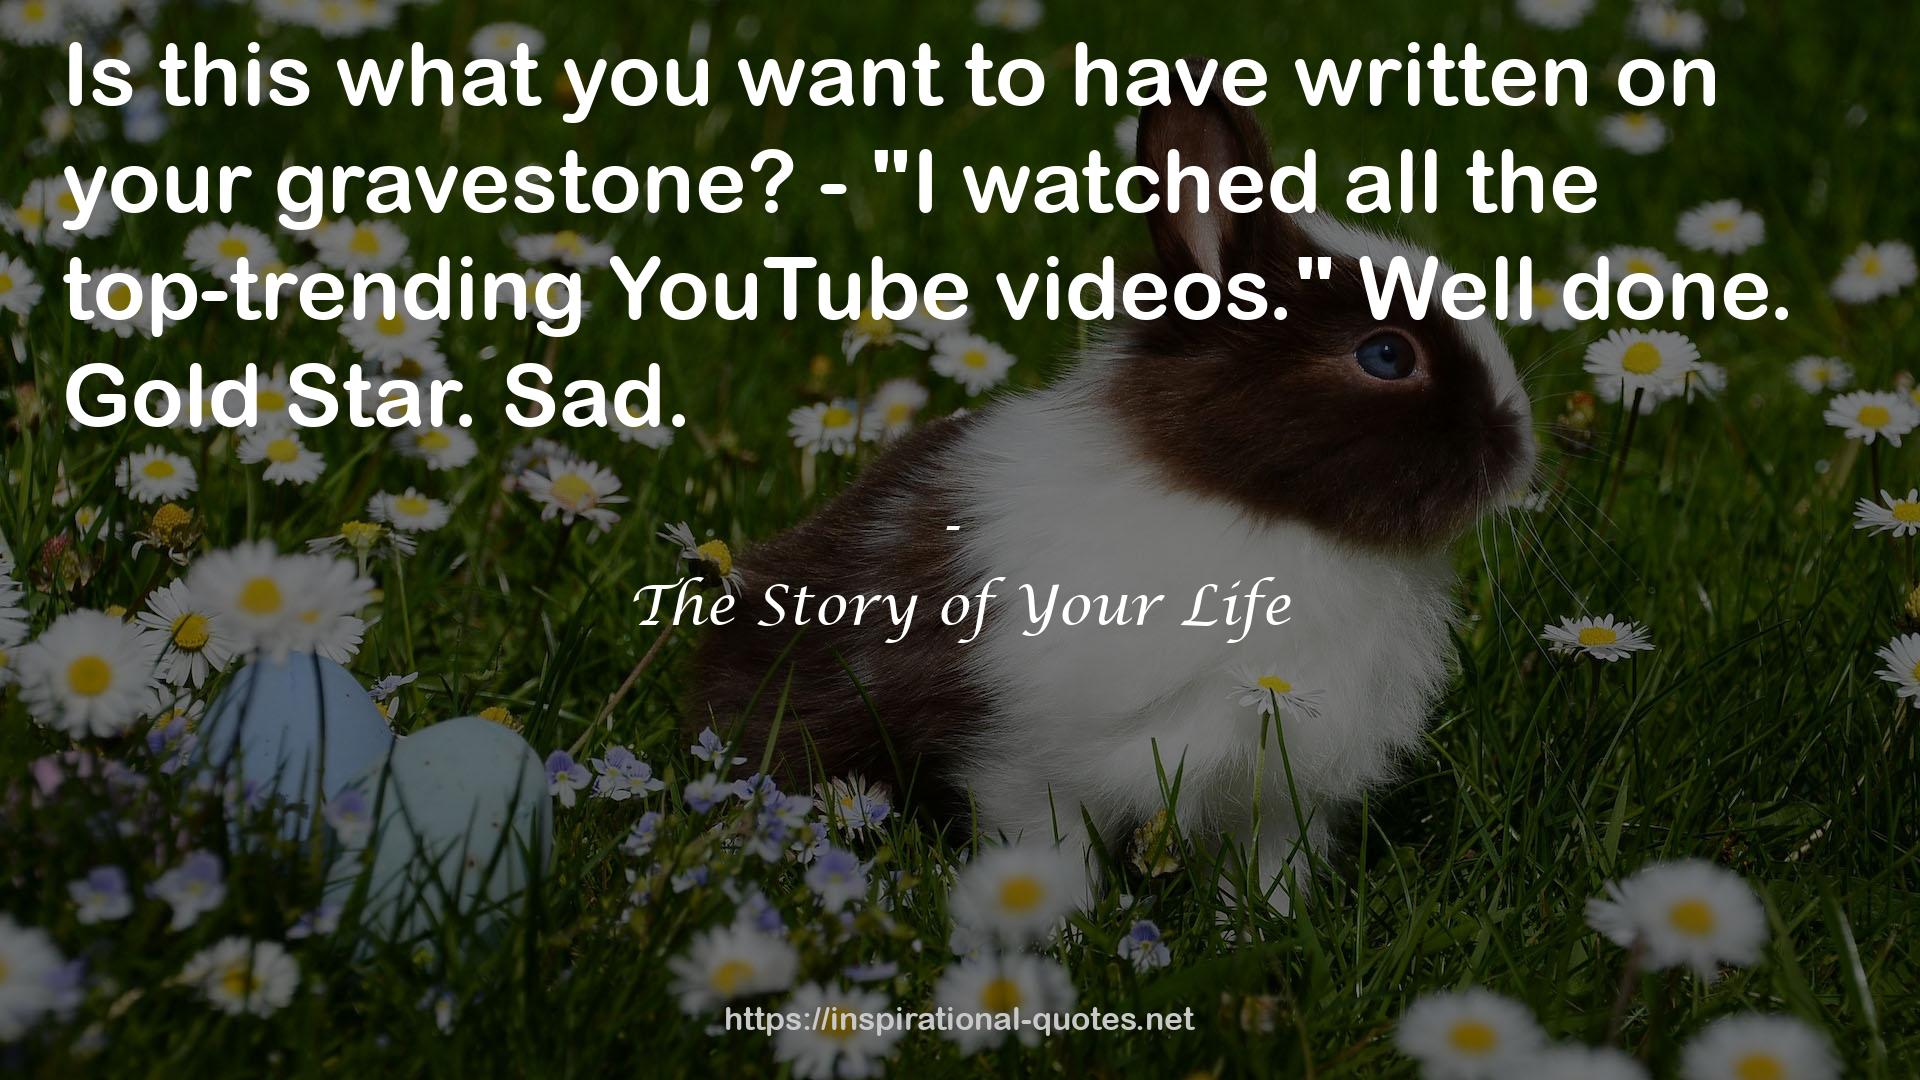 The Story of Your Life QUOTES